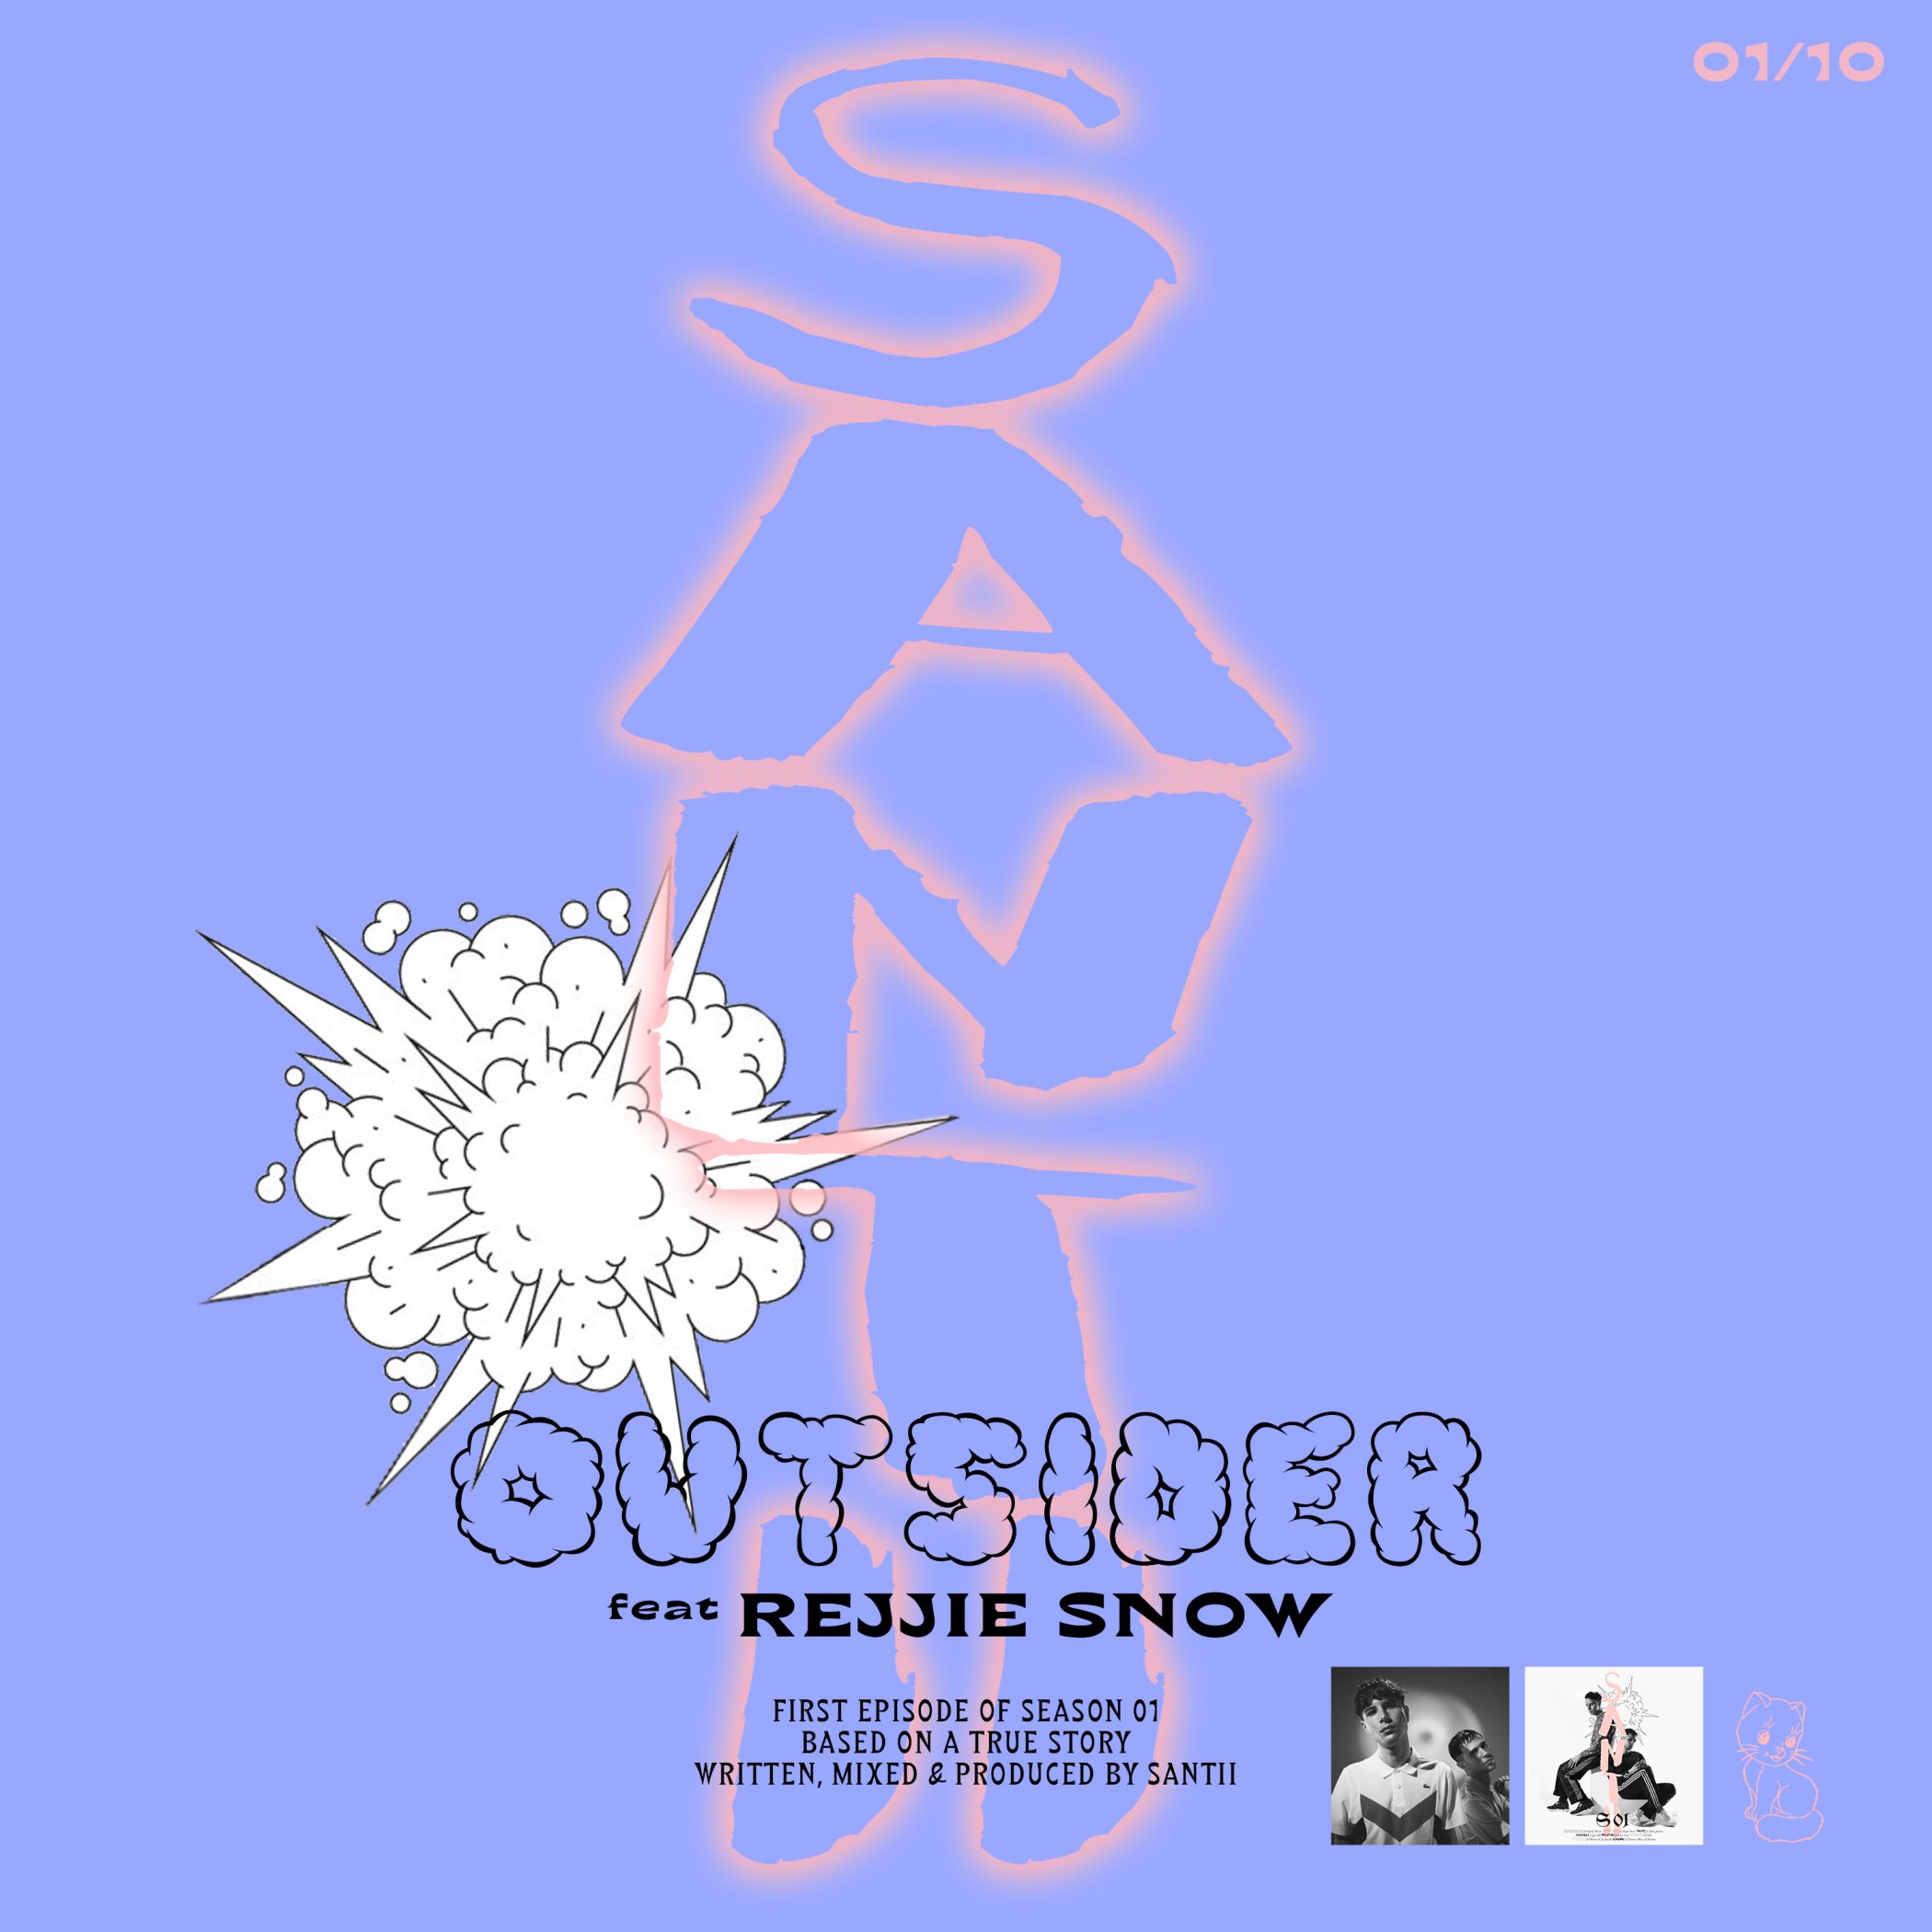 SANTII - OUTSIDER feat Rejjie Snow - cover primo singolo_b